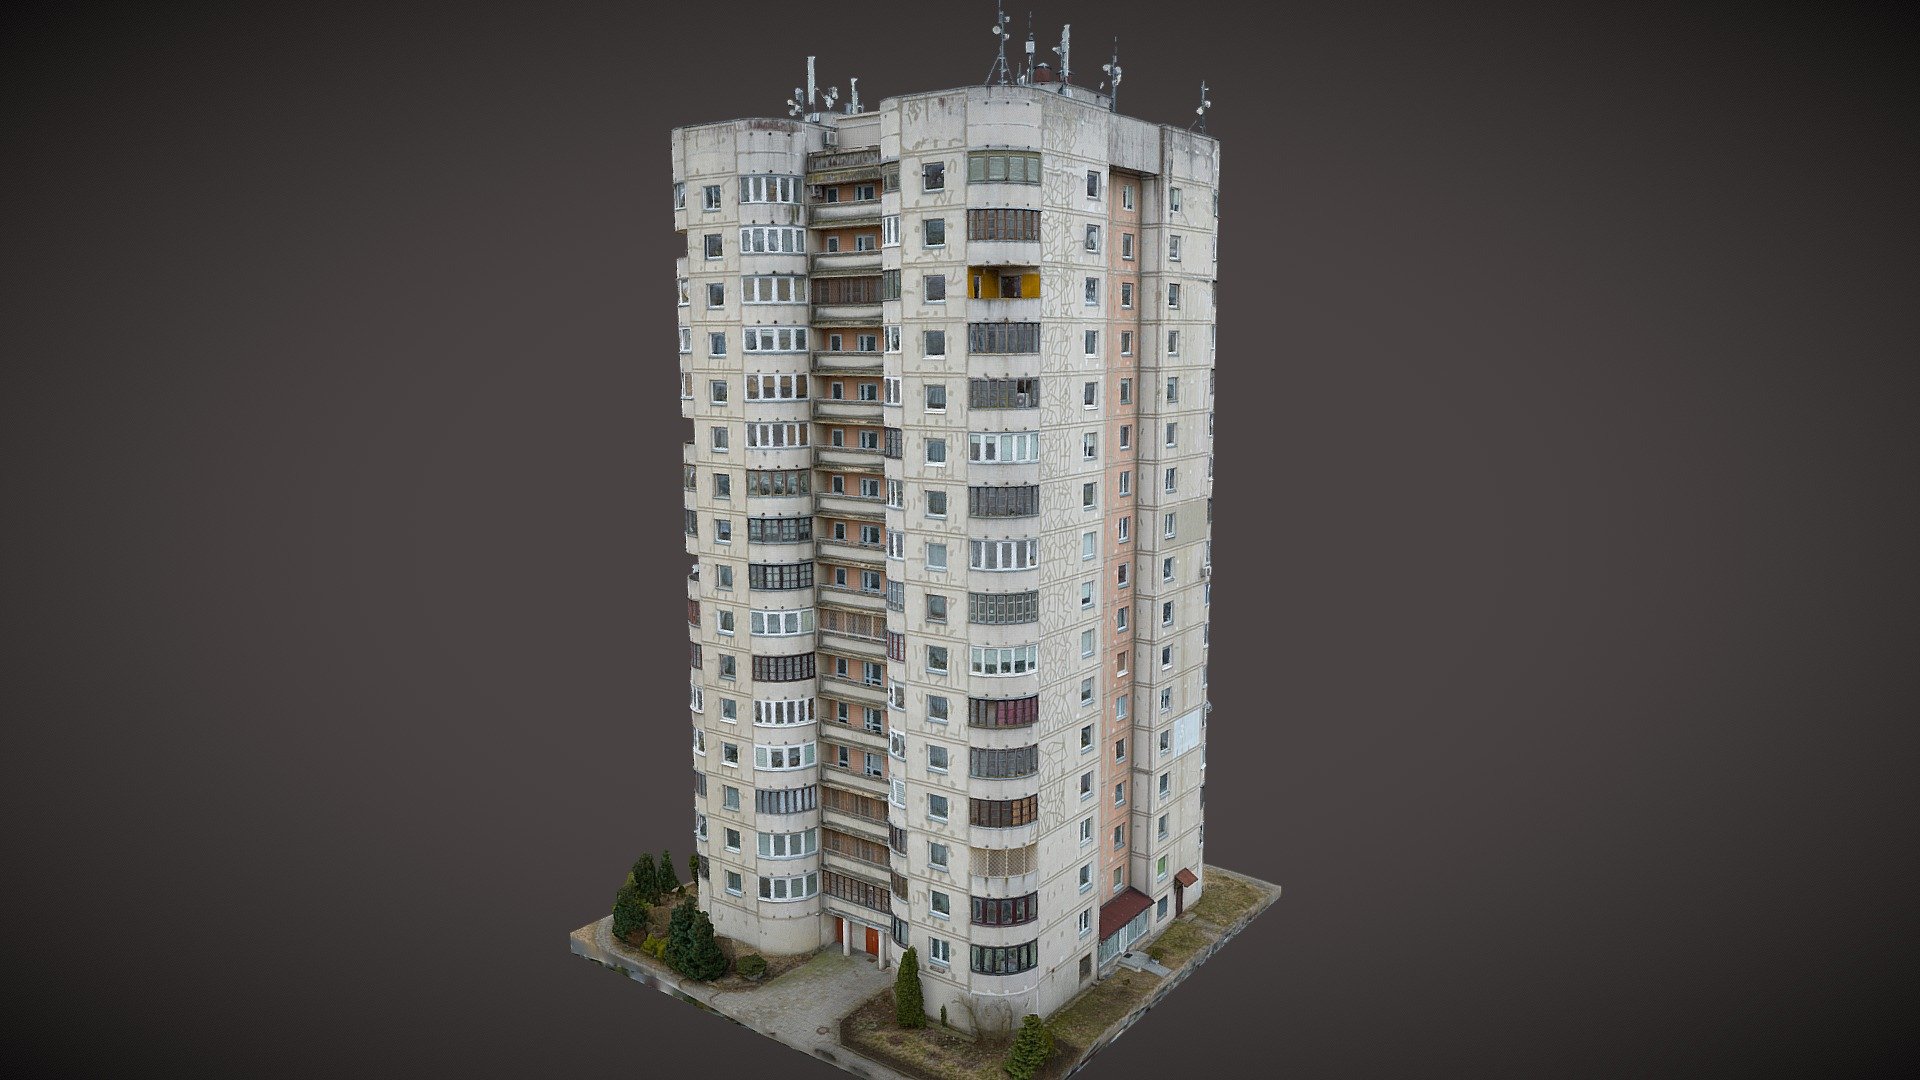 Soviet era 16 floor apartment building ready for renovation. Vilnius. Lithuania

Photogrammetry reconstruction in RealityCapture from 975 images. 
© Saulius Zaura www.dronepartner.lt 2023 - Soviet era 16 floor apartment building. Vilnius - 3D model by Saulius.Zaura 3d model